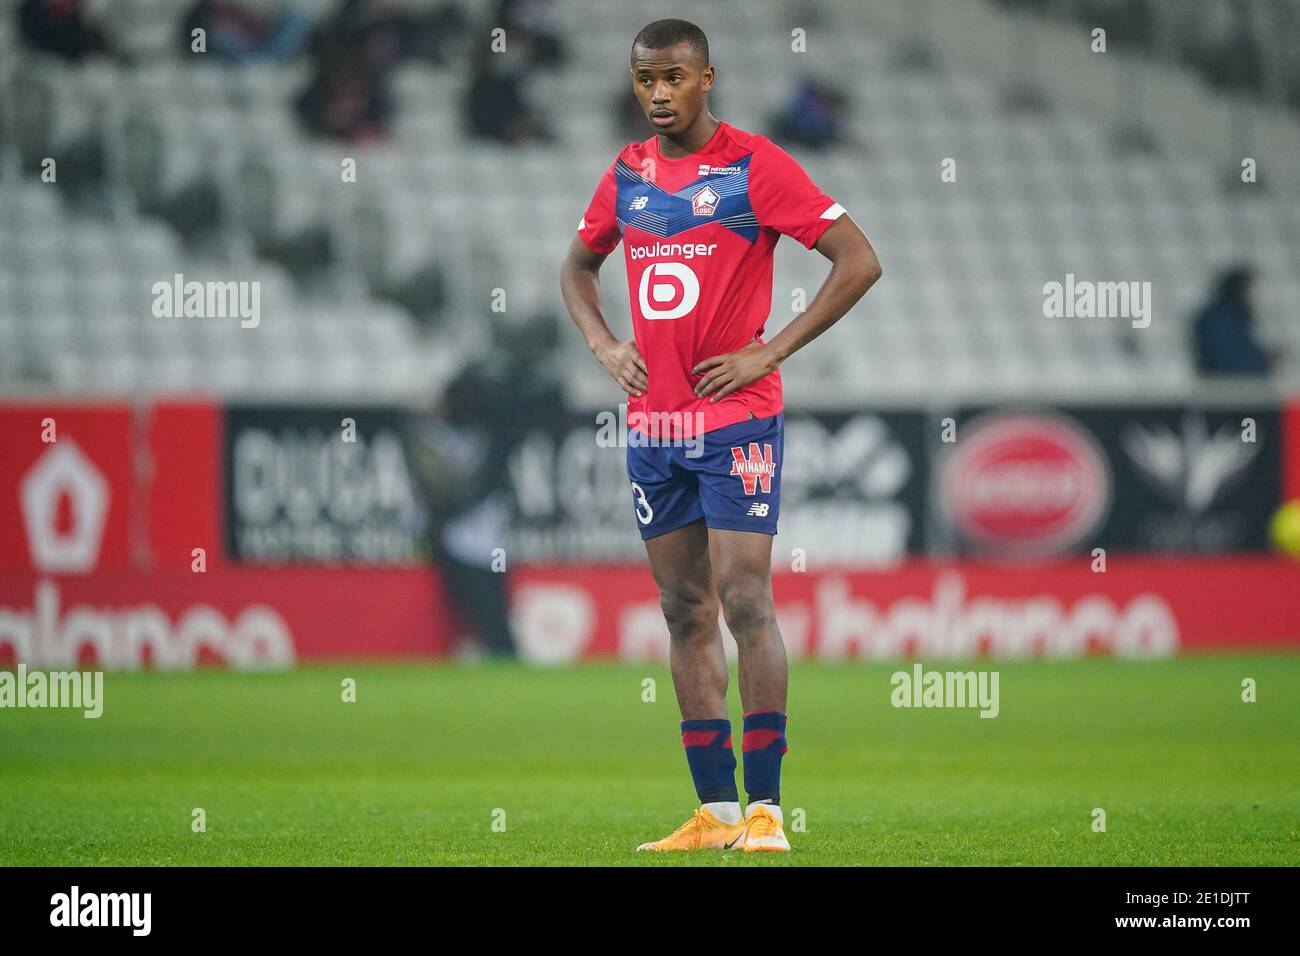 LILLE, FRANCE - JANUARY 6: Tiago Djalo of Lille OSC disappointed during the Ligue 1 match between Lille OSC and Angers SCO at Stade Pierre Mauroy on January 6, 2021 in Lille, France (Photo by Jeroen Meuwsen/BSR Agency/Alamy Live News)*** Local Caption *** Tiago Djalo disappointed Stock Photo